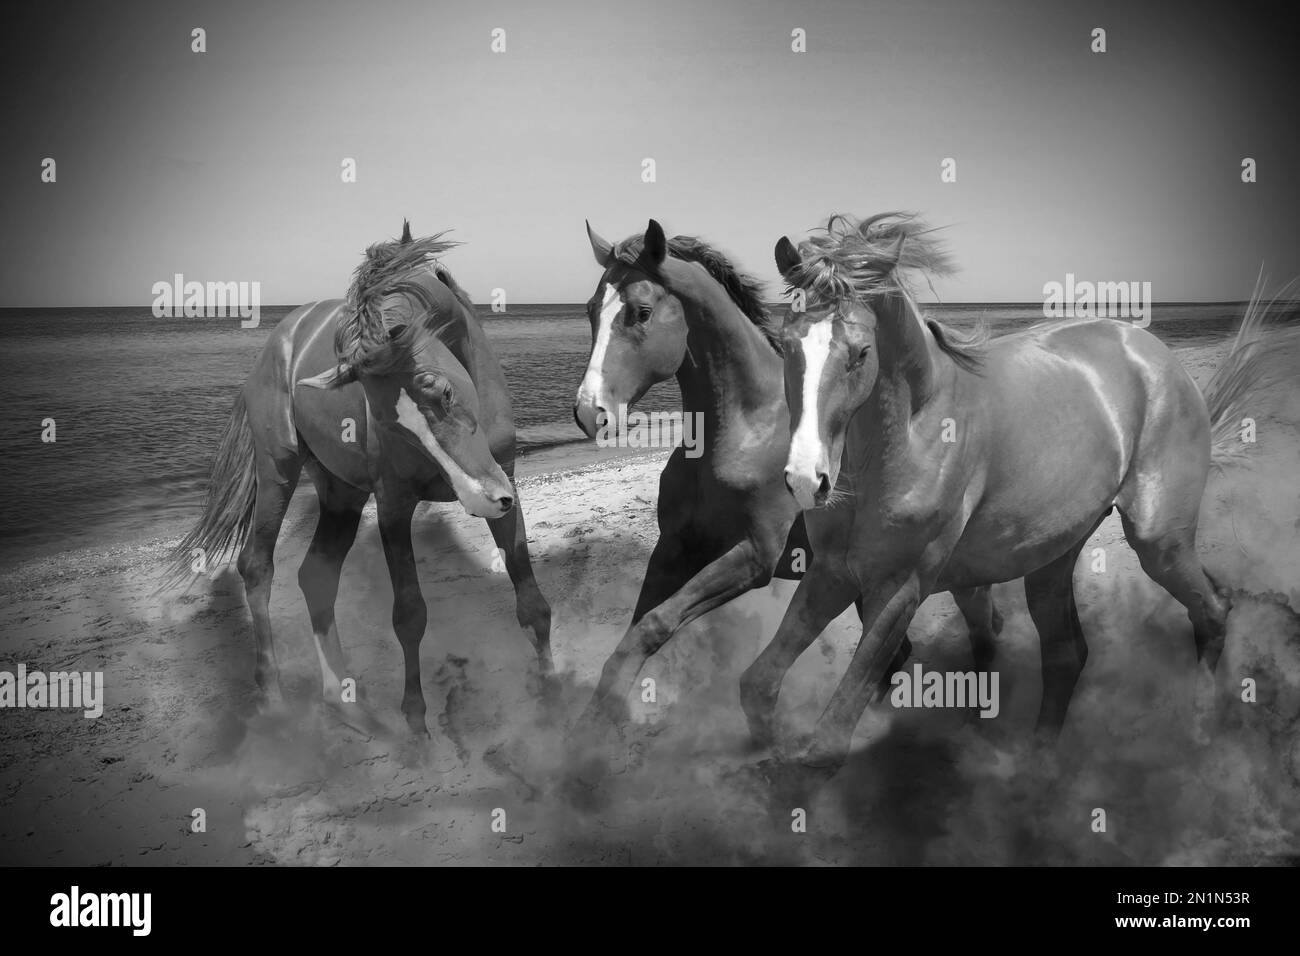 Beautiful horses kicking up dust while running near sea, black and ...